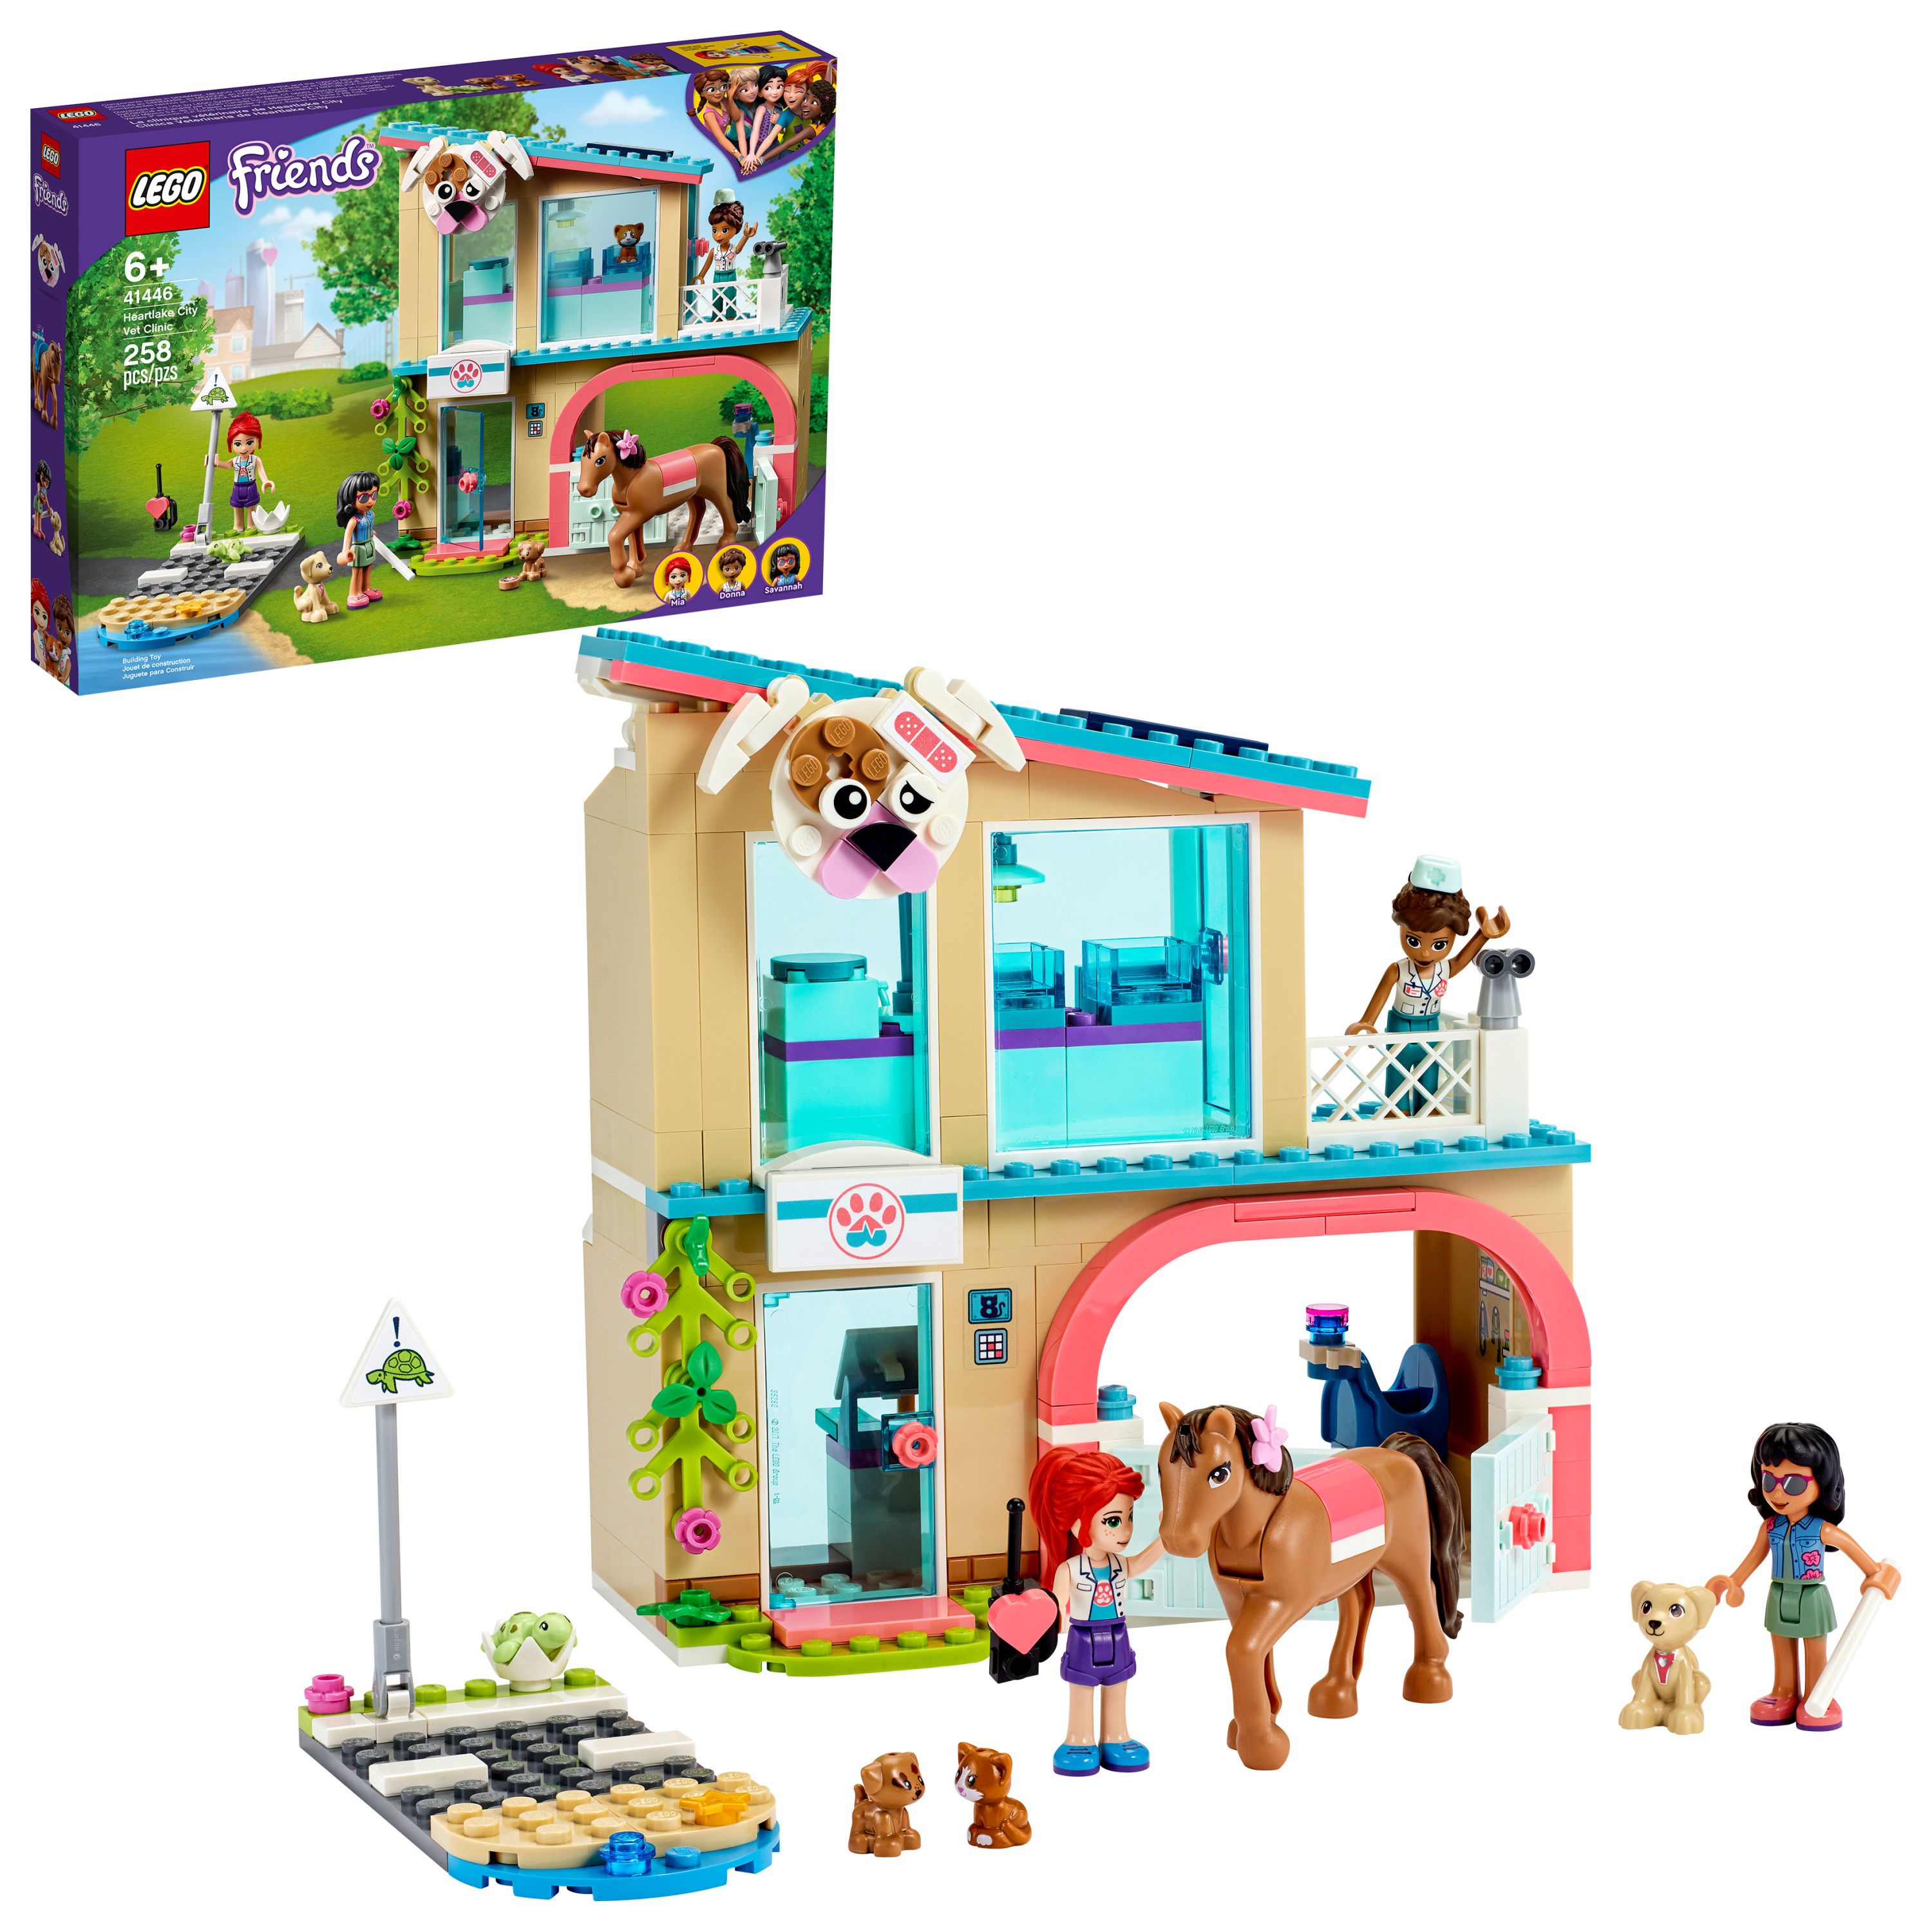 LEGO Friends Heartlake City Vet Clinic 41446 Building Toy With LEGO Friends Mia (258 Pieces) | Walmart (US)